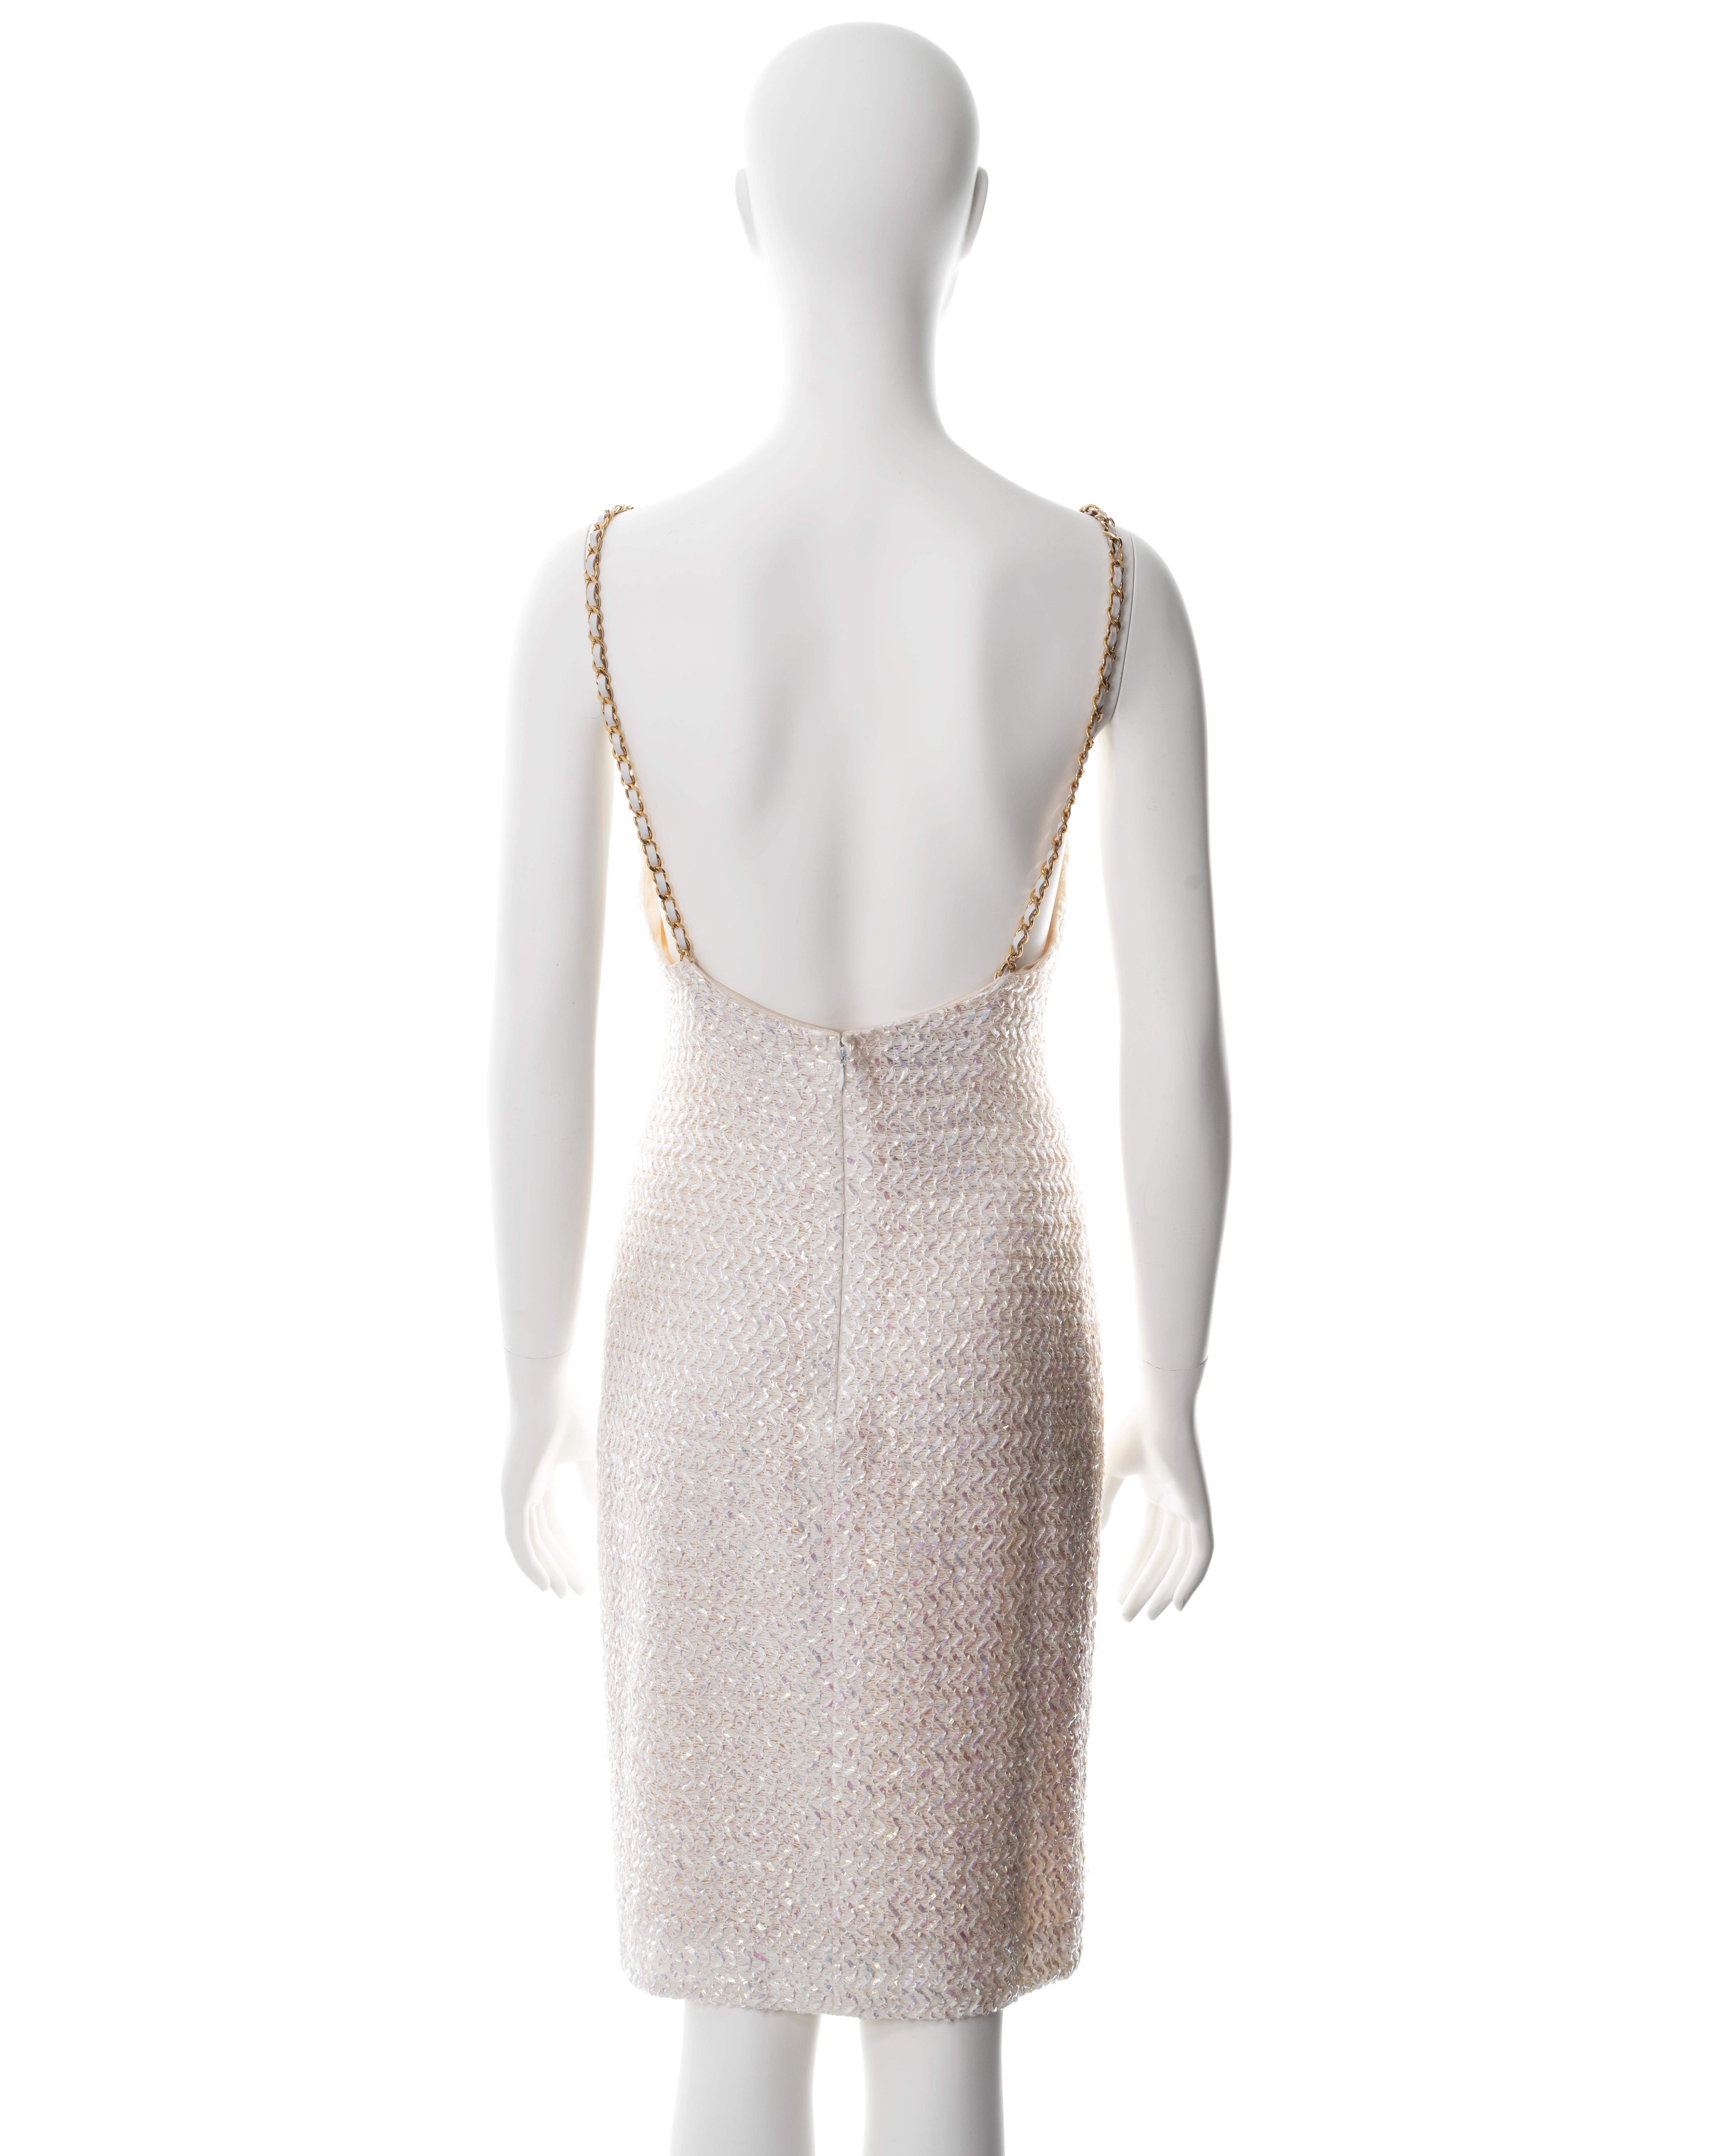 Chanel by Karl Lagerfeld white tweed sheath dress with chain straps, ss 1992 6